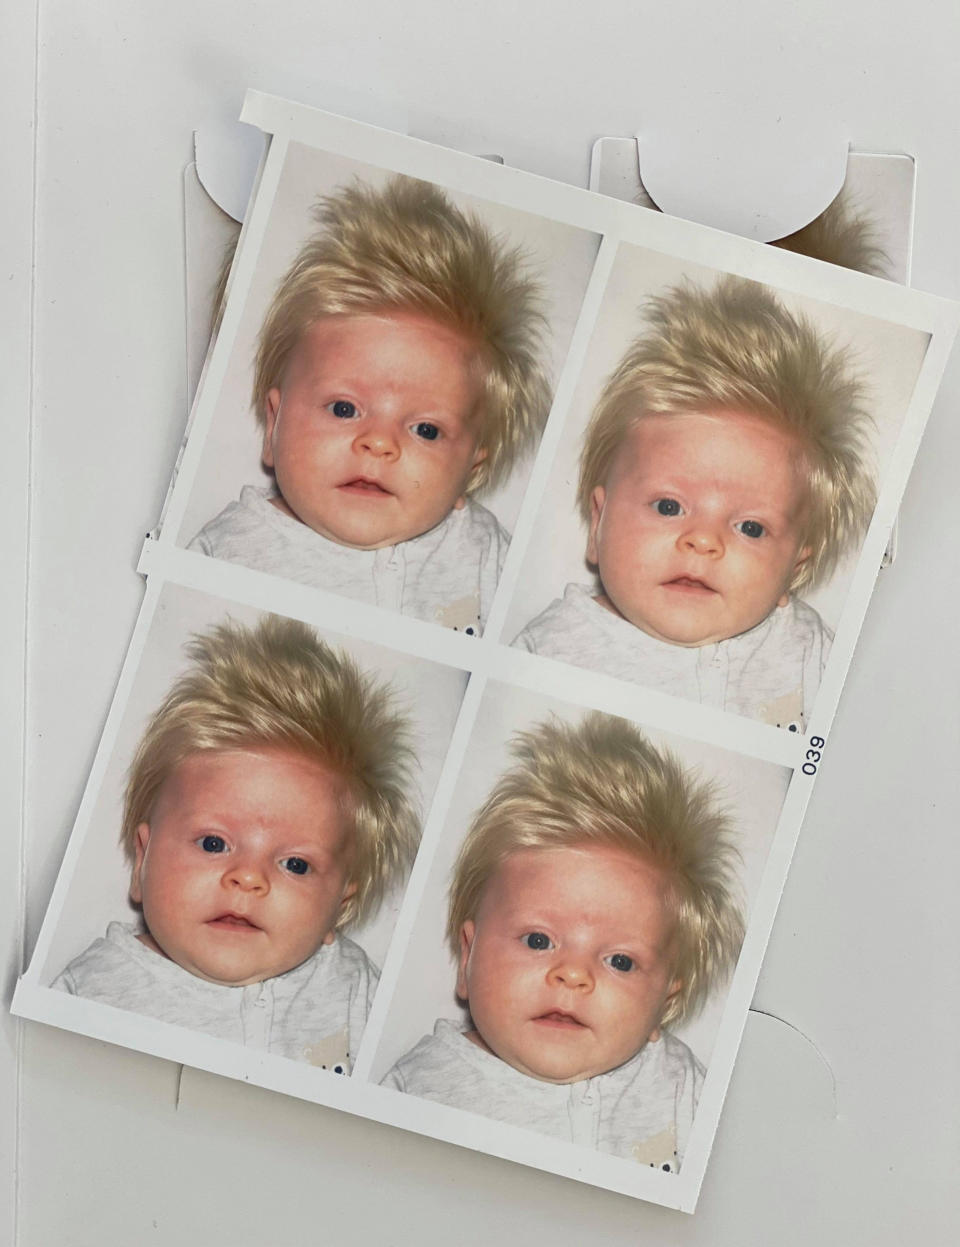 David's passport photos at just 2 months old. (Caters)